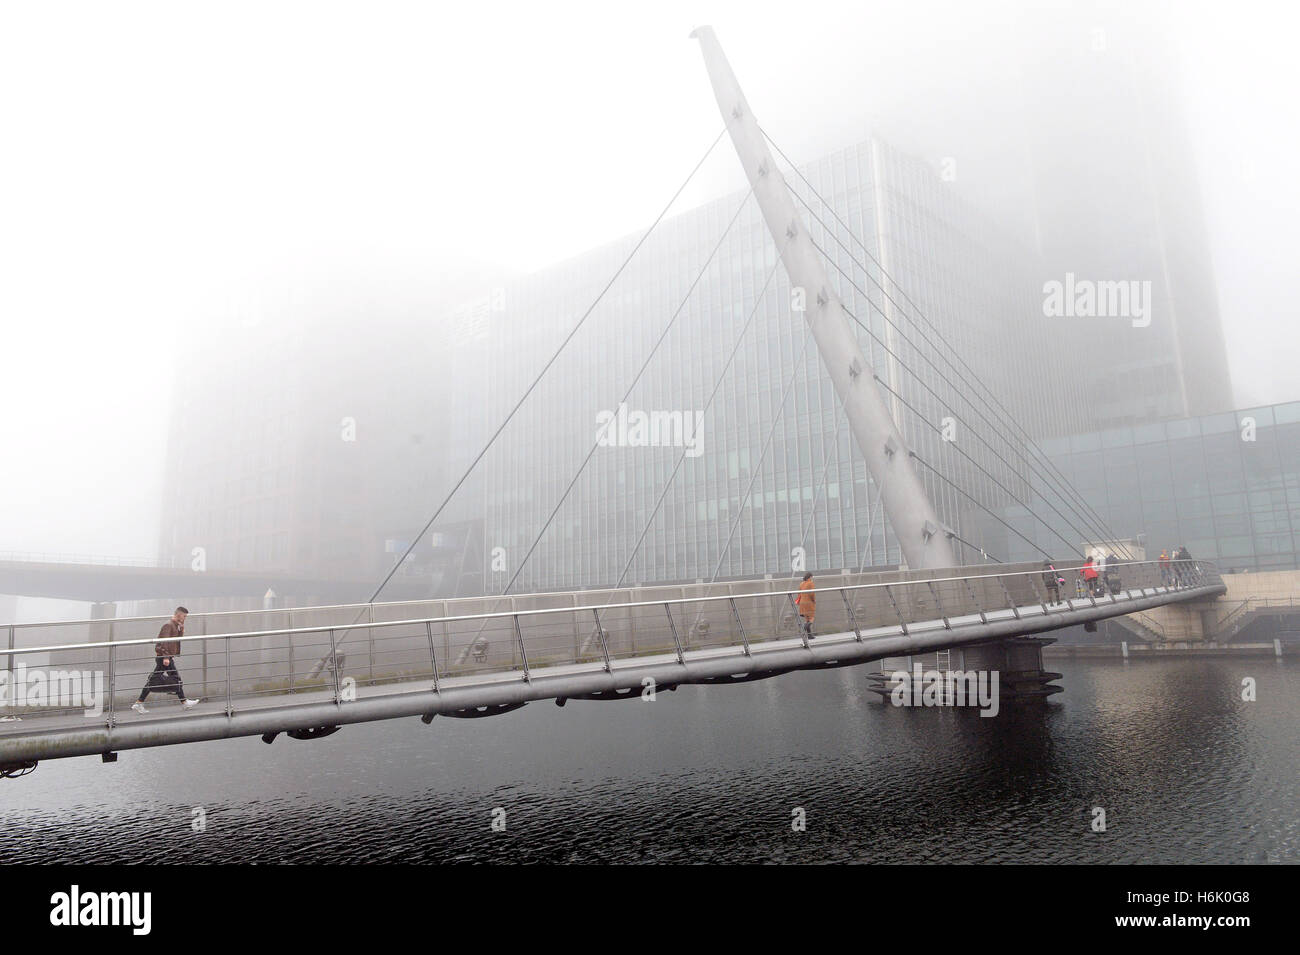 People walk across the swing bridge in Canary Wharf, London, as mist obscures the top of the buildings. Stock Photo